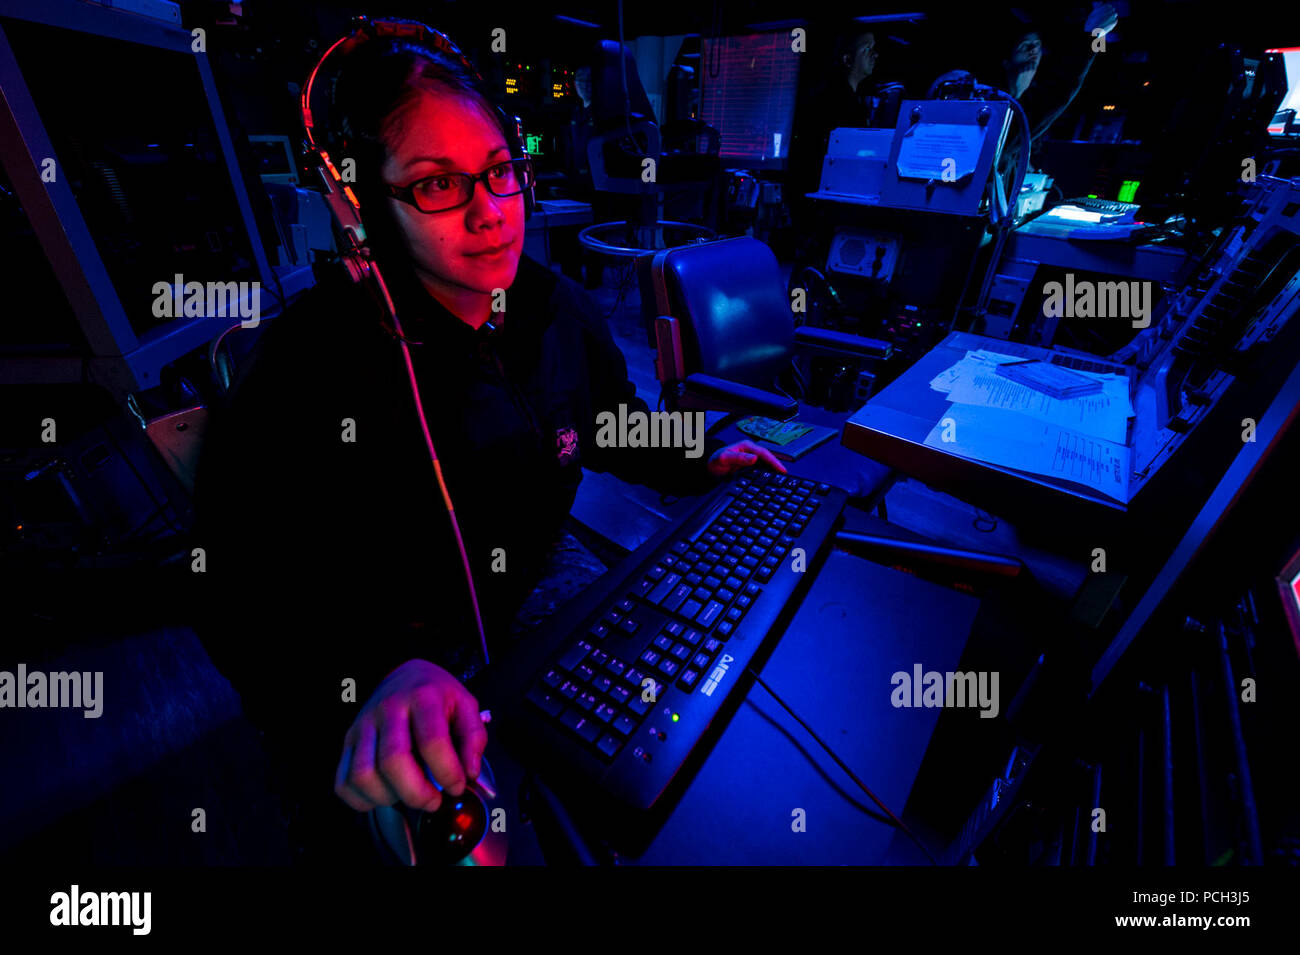 CORAL SEA (Aug. 9, 2013) Operations Specialist 2nd Class Marlene Hernandez monitors radar signatures in the combat operations center aboard the amphibious assault ship USS Bonhomme Richard (LHD 6). Bonhomme Richard is the flagship of the Bonhomme Richard Amphibious Ready Group and, with the embarked 31st Marine Expeditionary Unit (31st MEU), is conducting a certification exercise in the U.S. 7th Fleet area of responsibility. Stock Photo